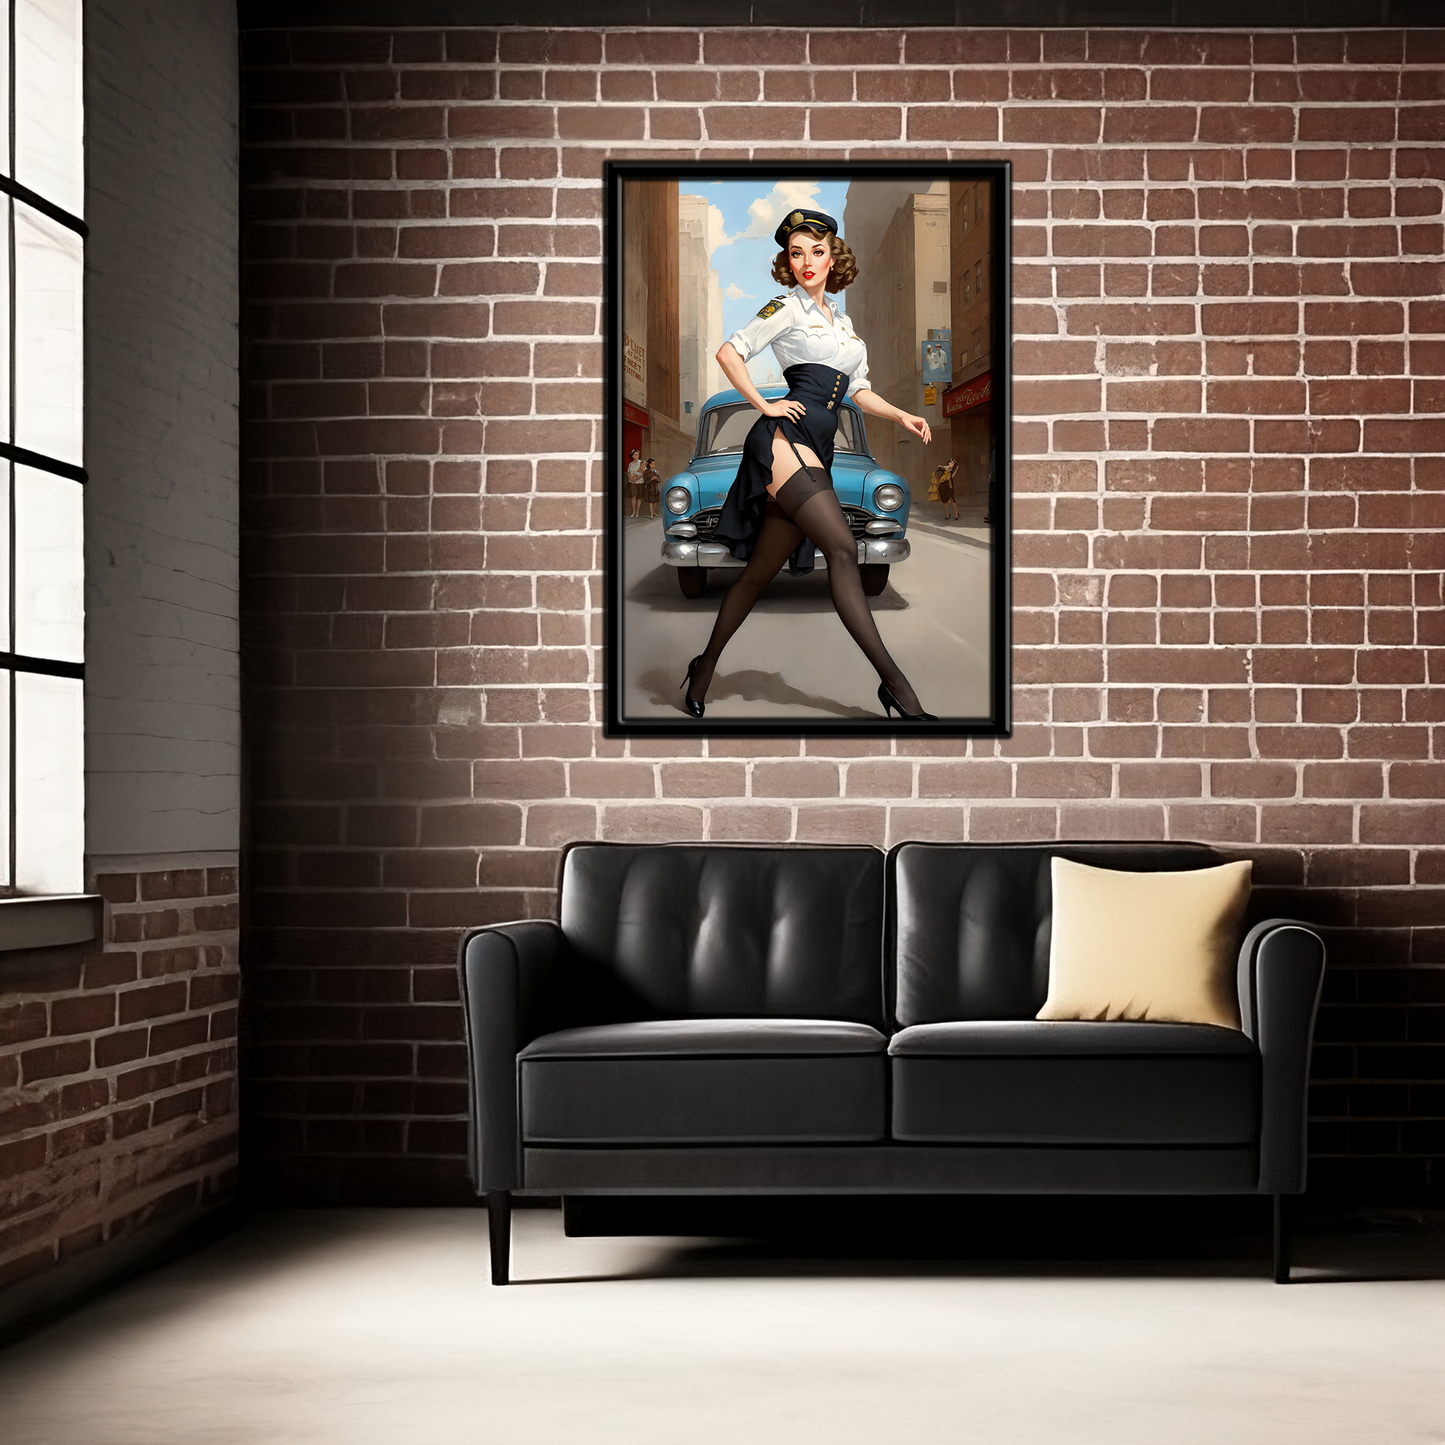 Daily Pinup #04 - The Traffic Stop Retro Pinup Wall Art